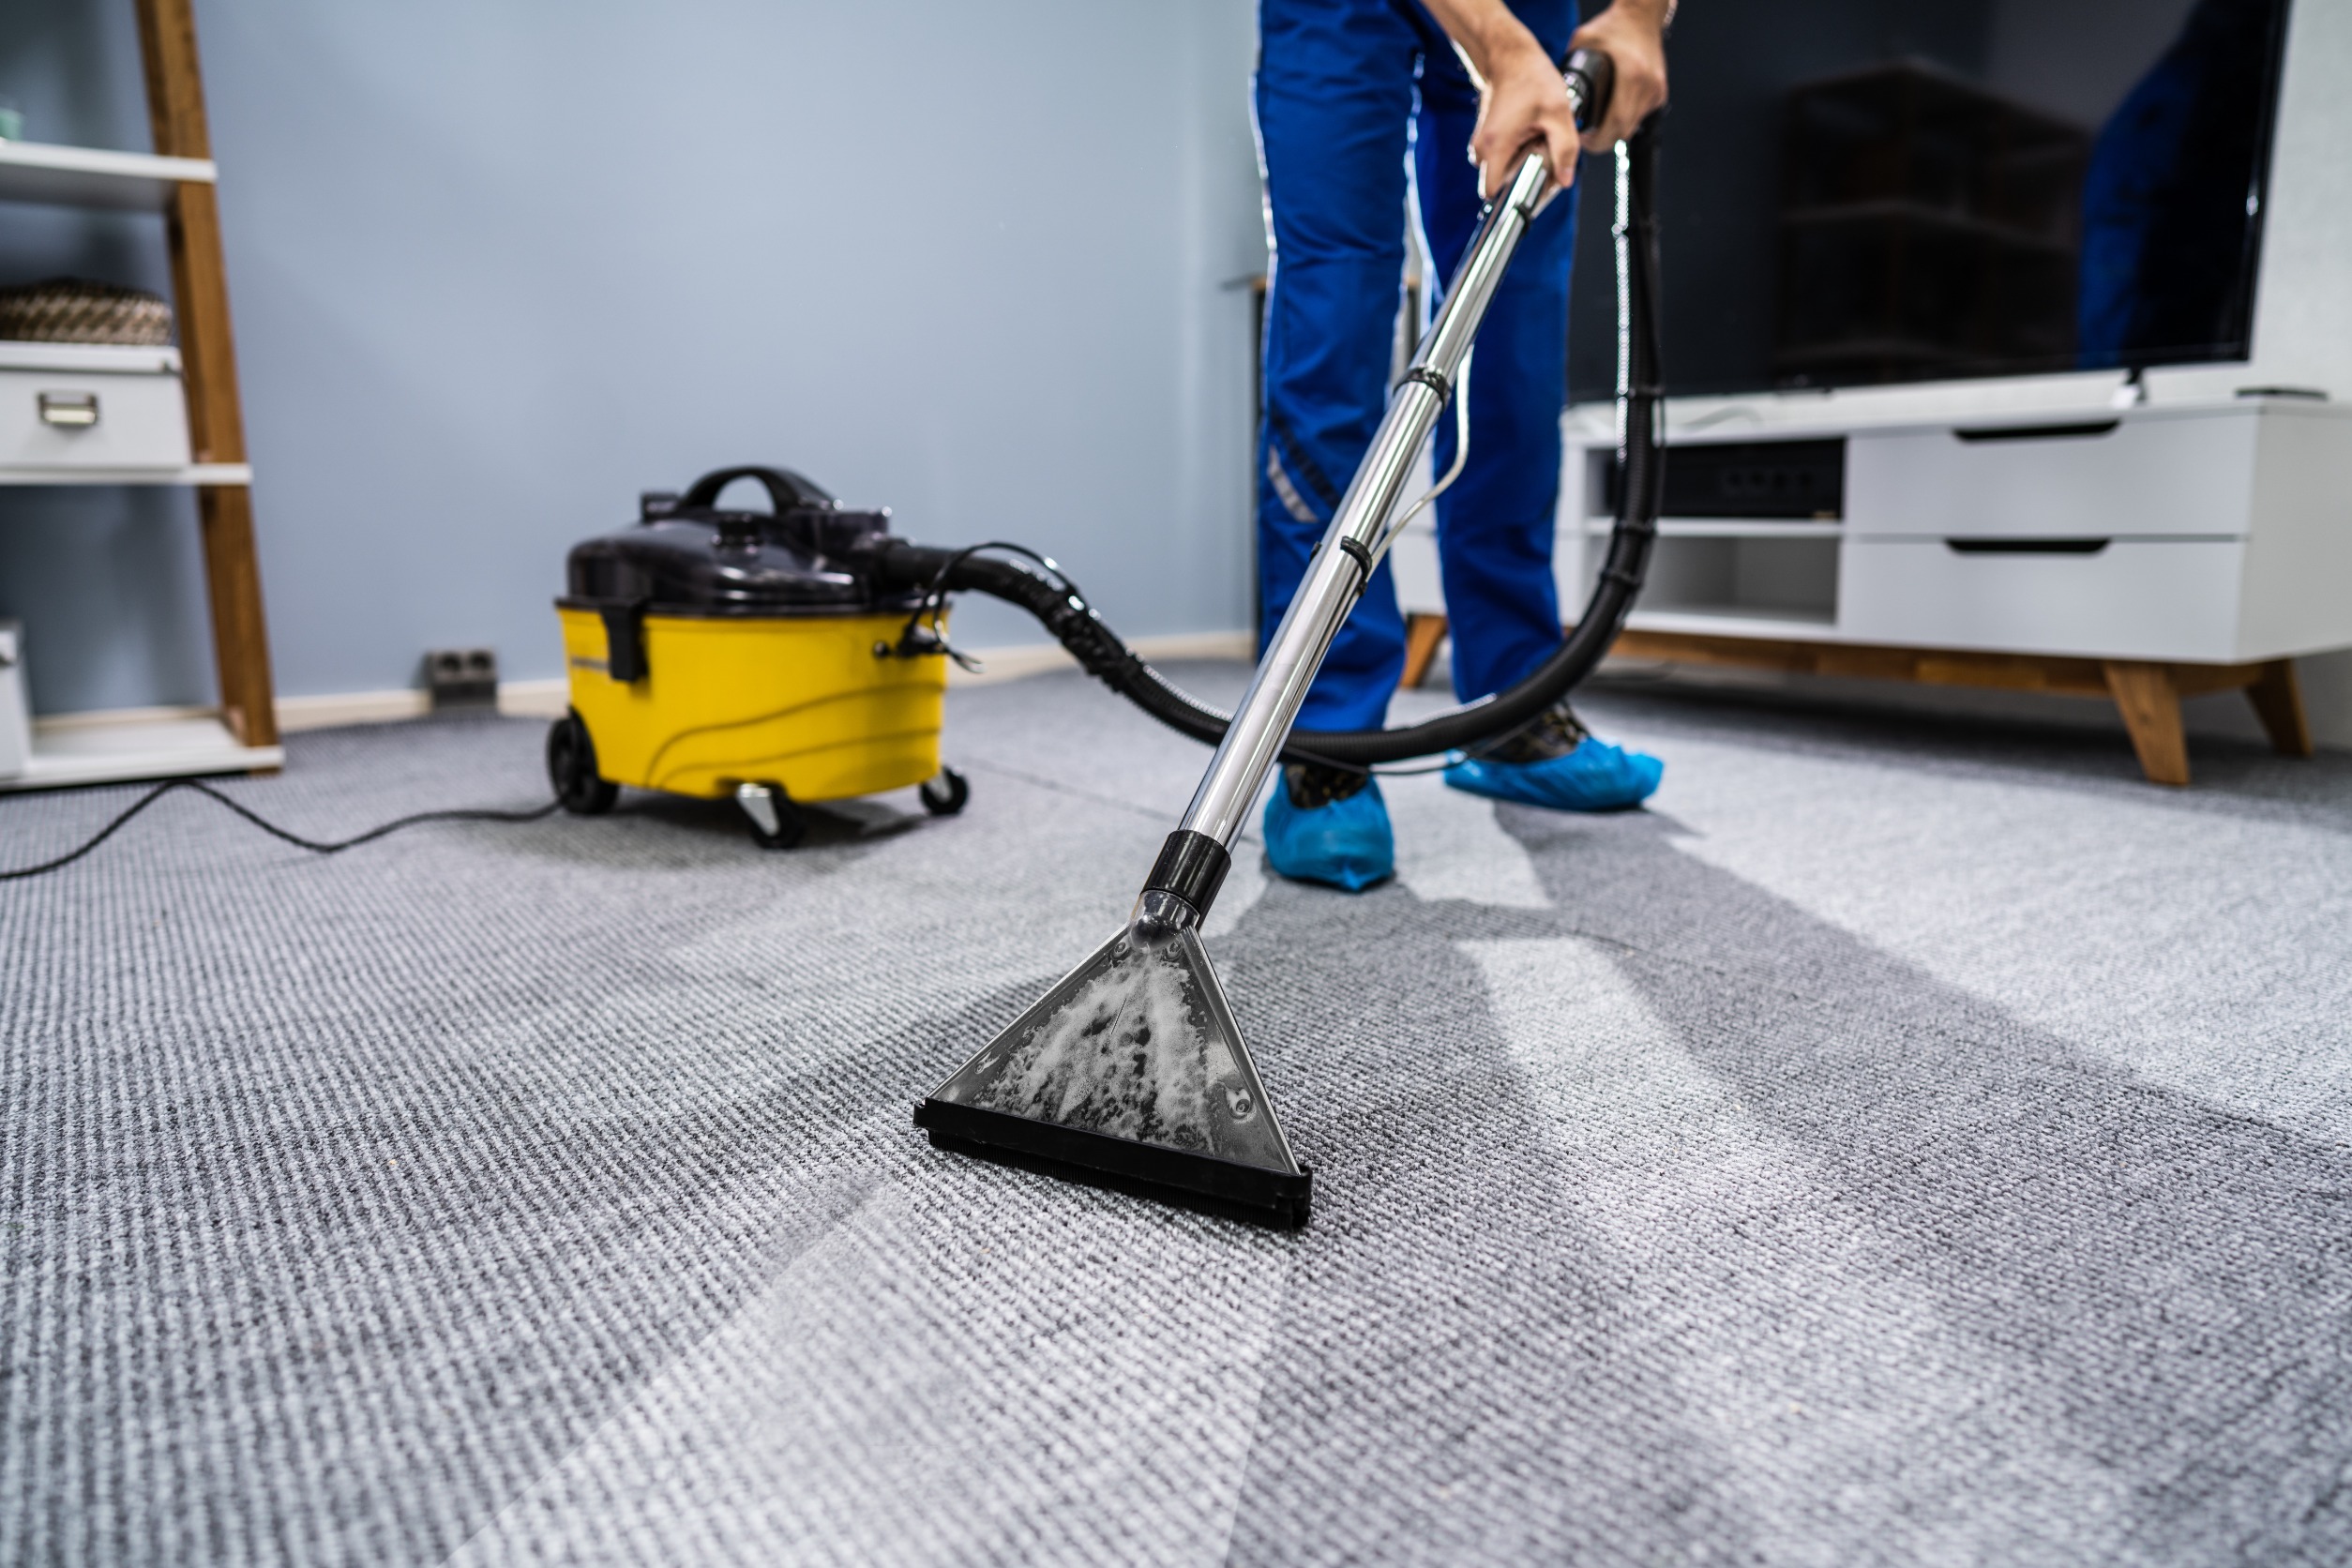 Why is Professional Carpet Cleaning Important?